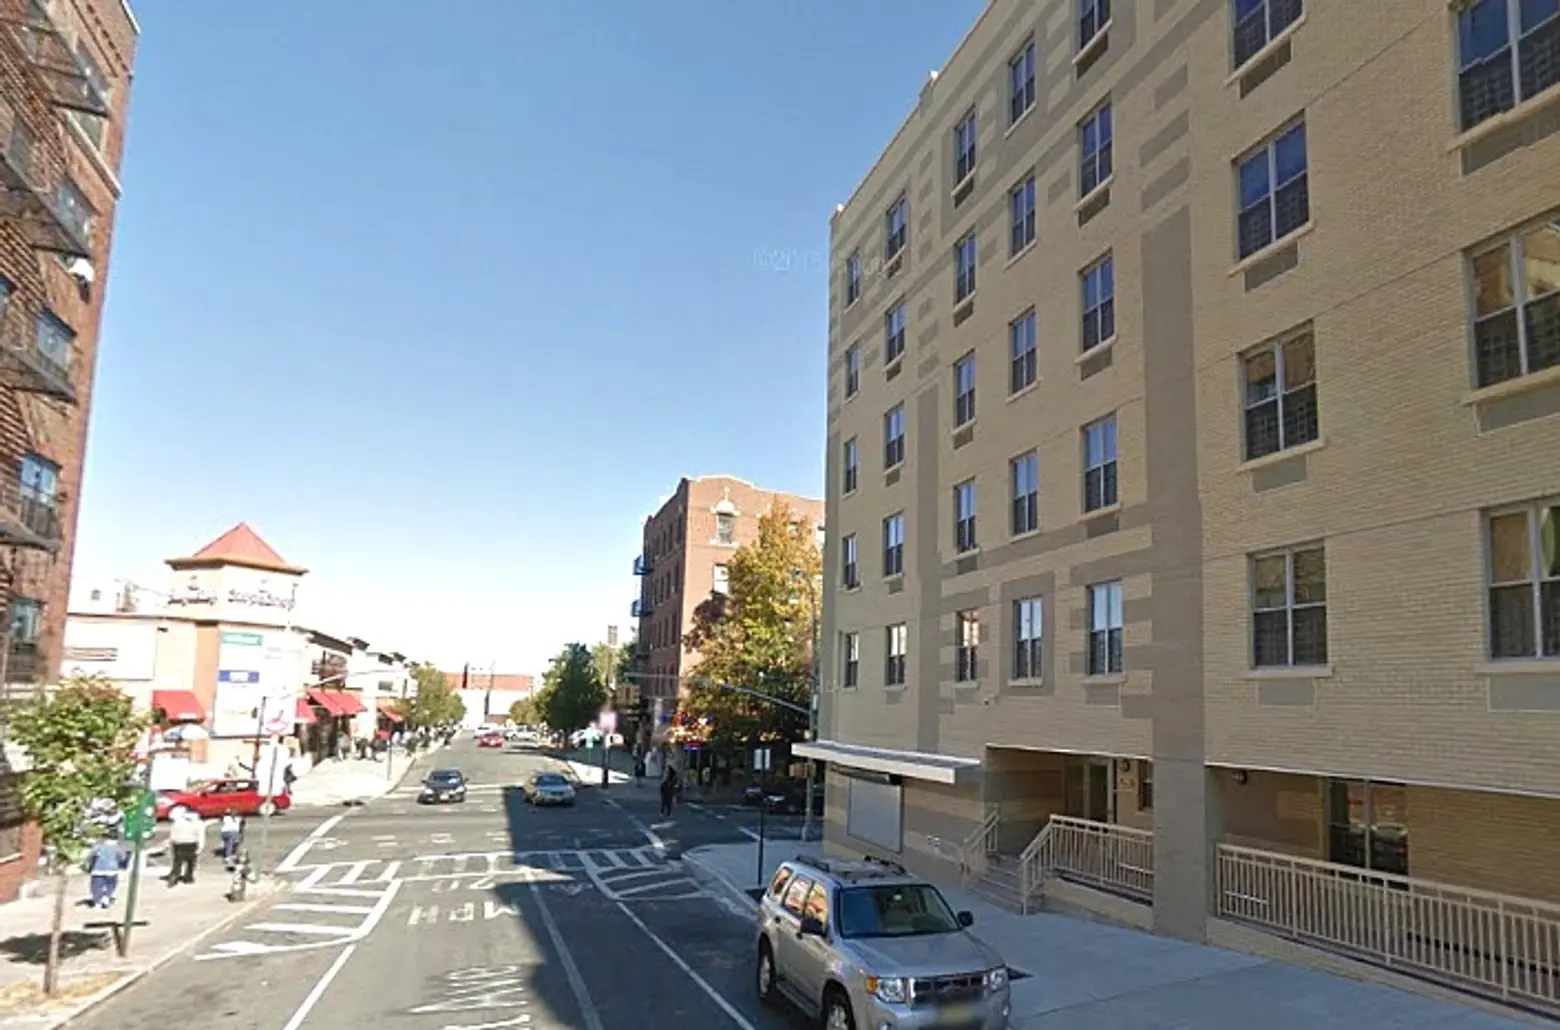 Lottery Opens for 10 Affordable Units in the Bronx’s Crotona Park East Neighborhood